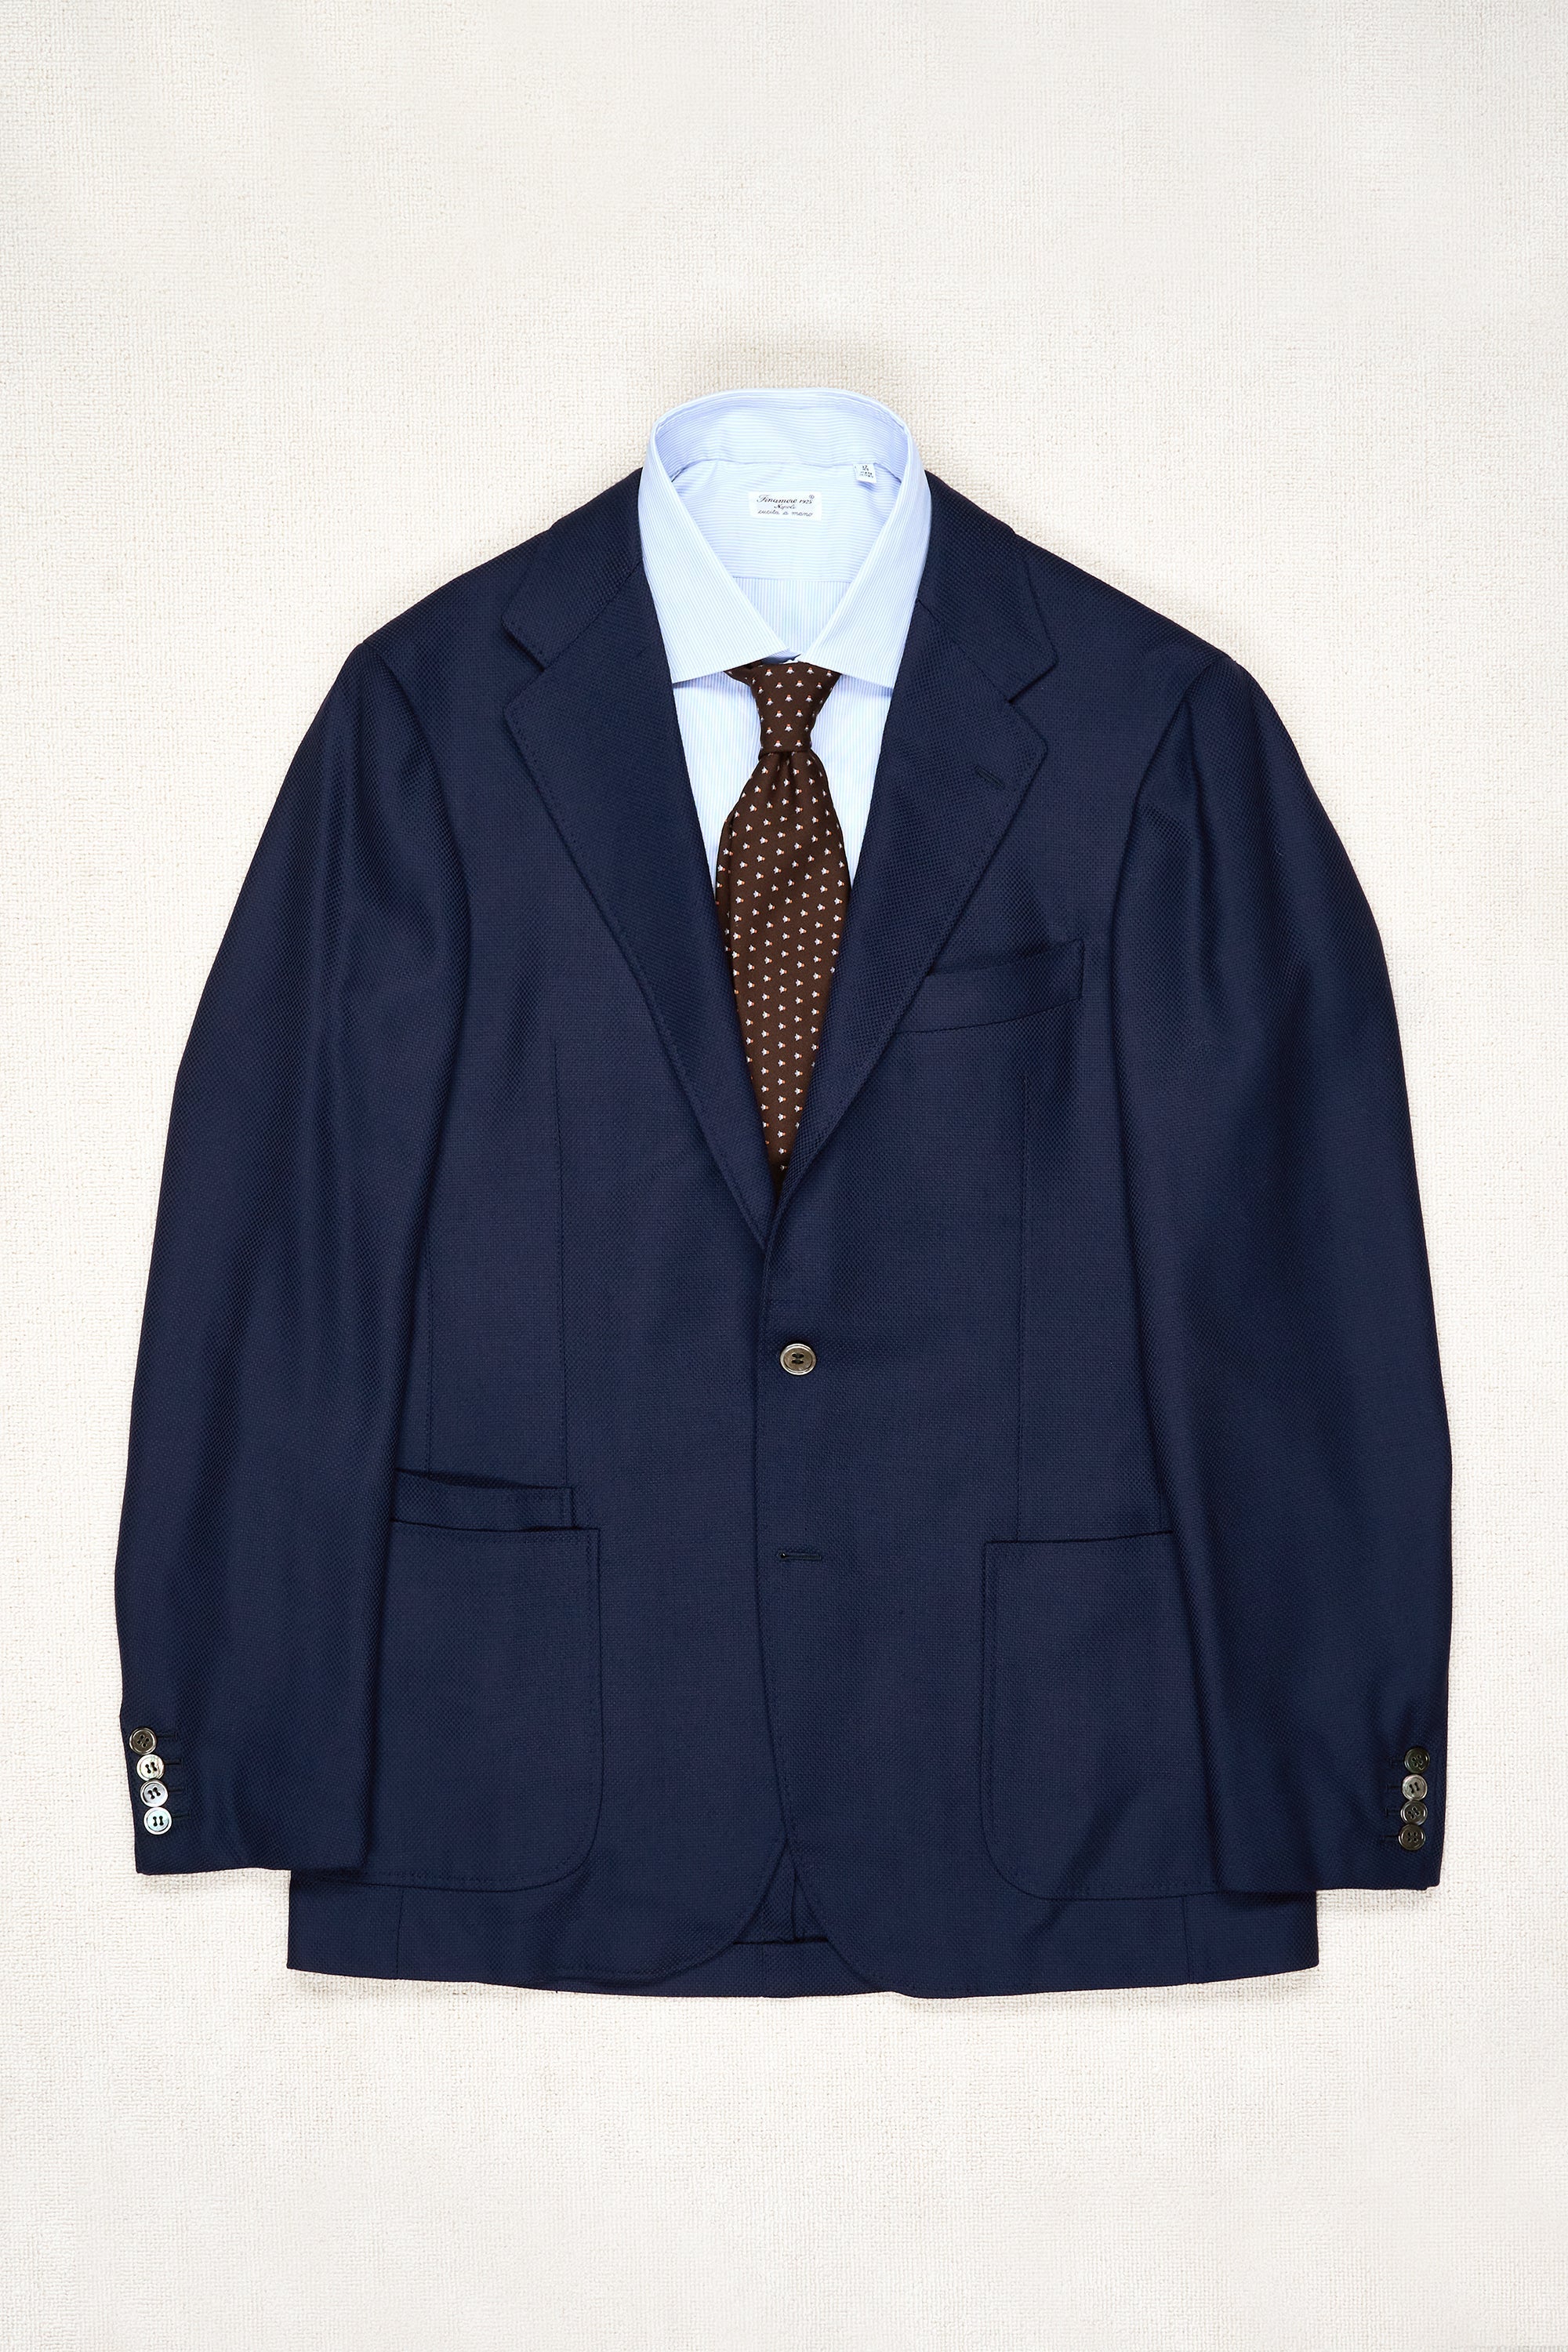 Ring Jacket Meister Navy Wool/Cashmere Sport Coat